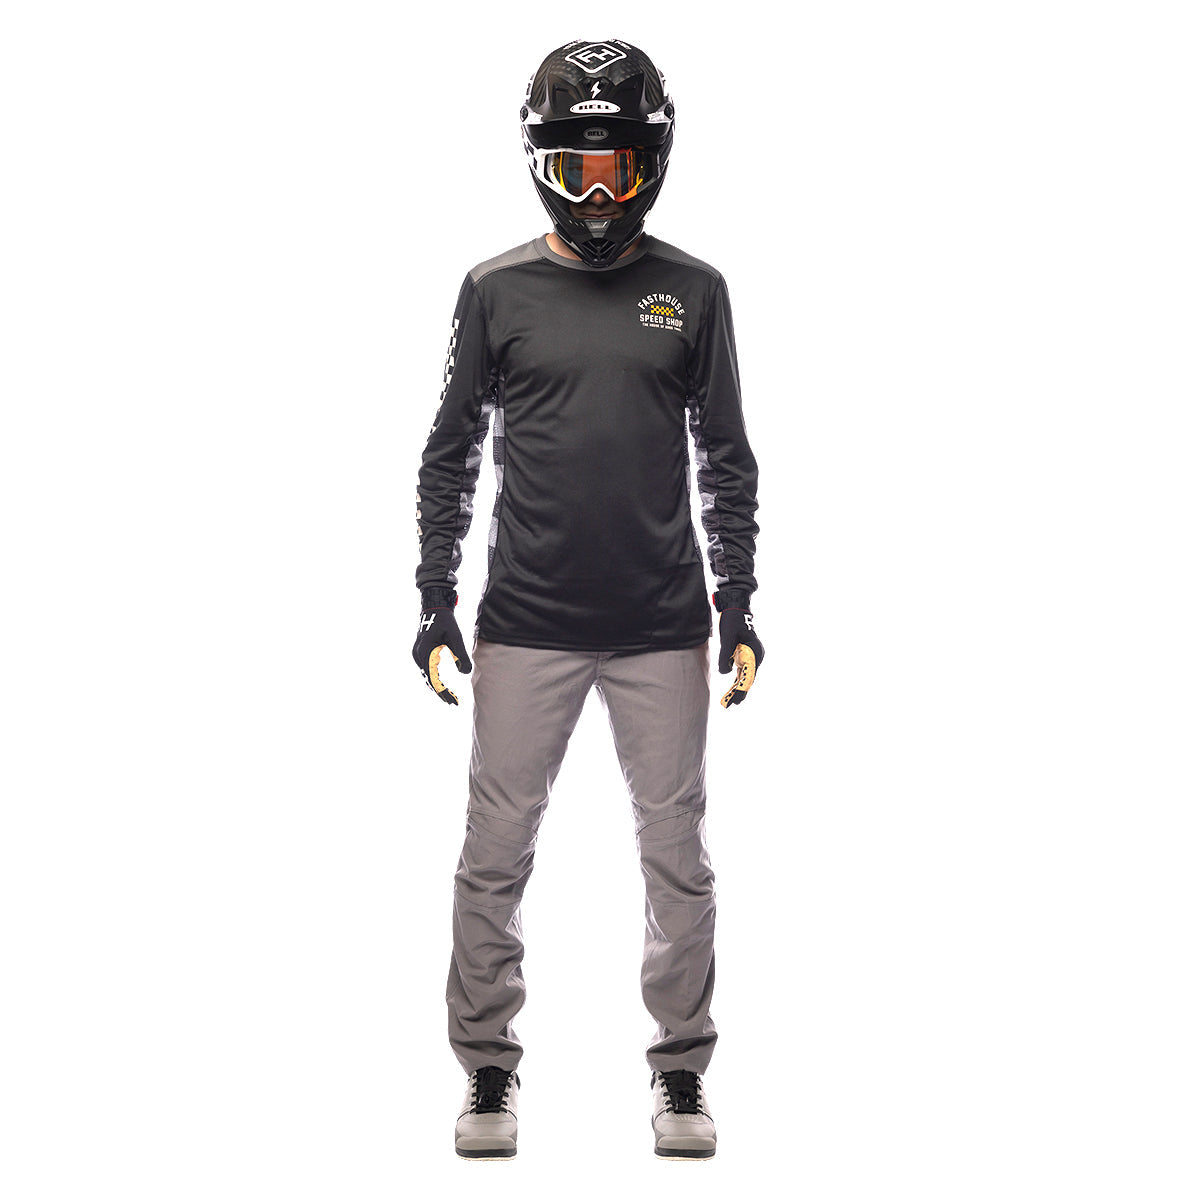 Classic Outland Long Sleeve Jersey - Black